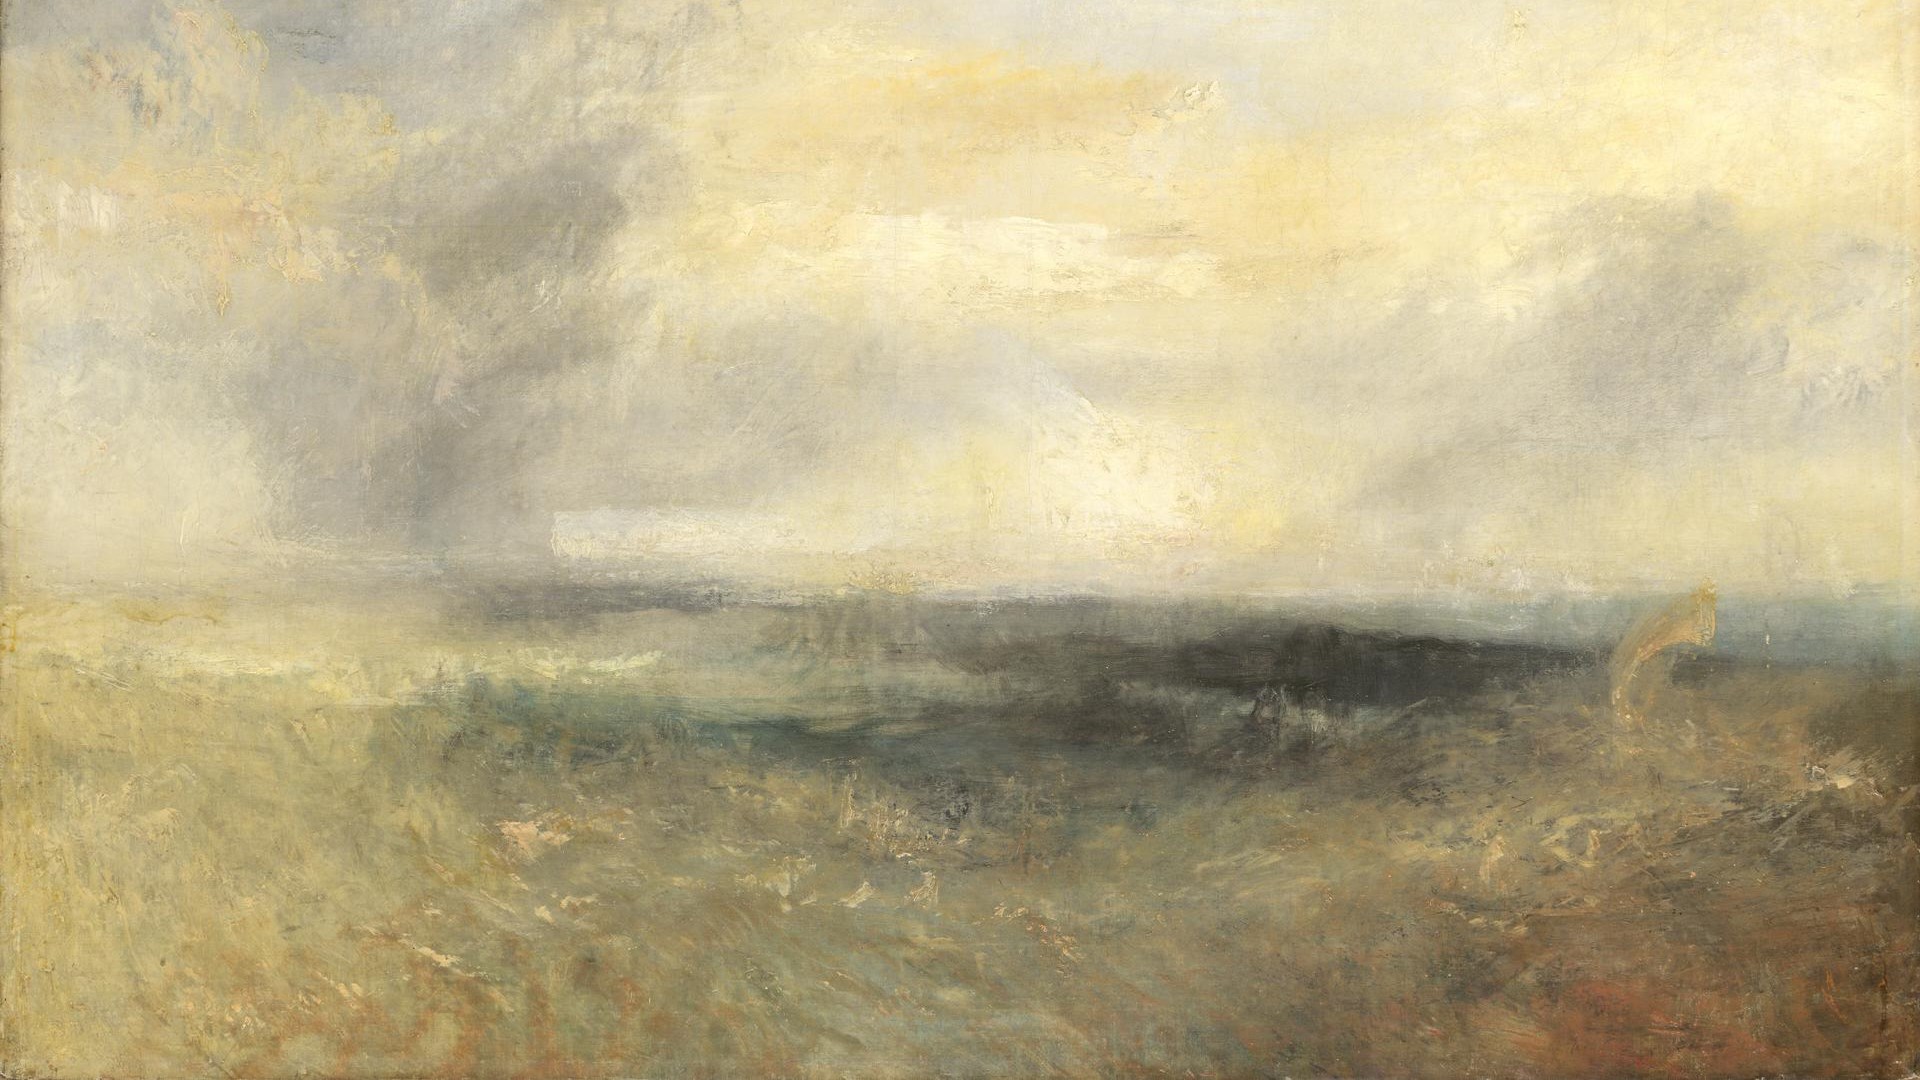 Joseph Mallord William Turner. Margate (?), from the Sea. NG1984. National Gallery, London